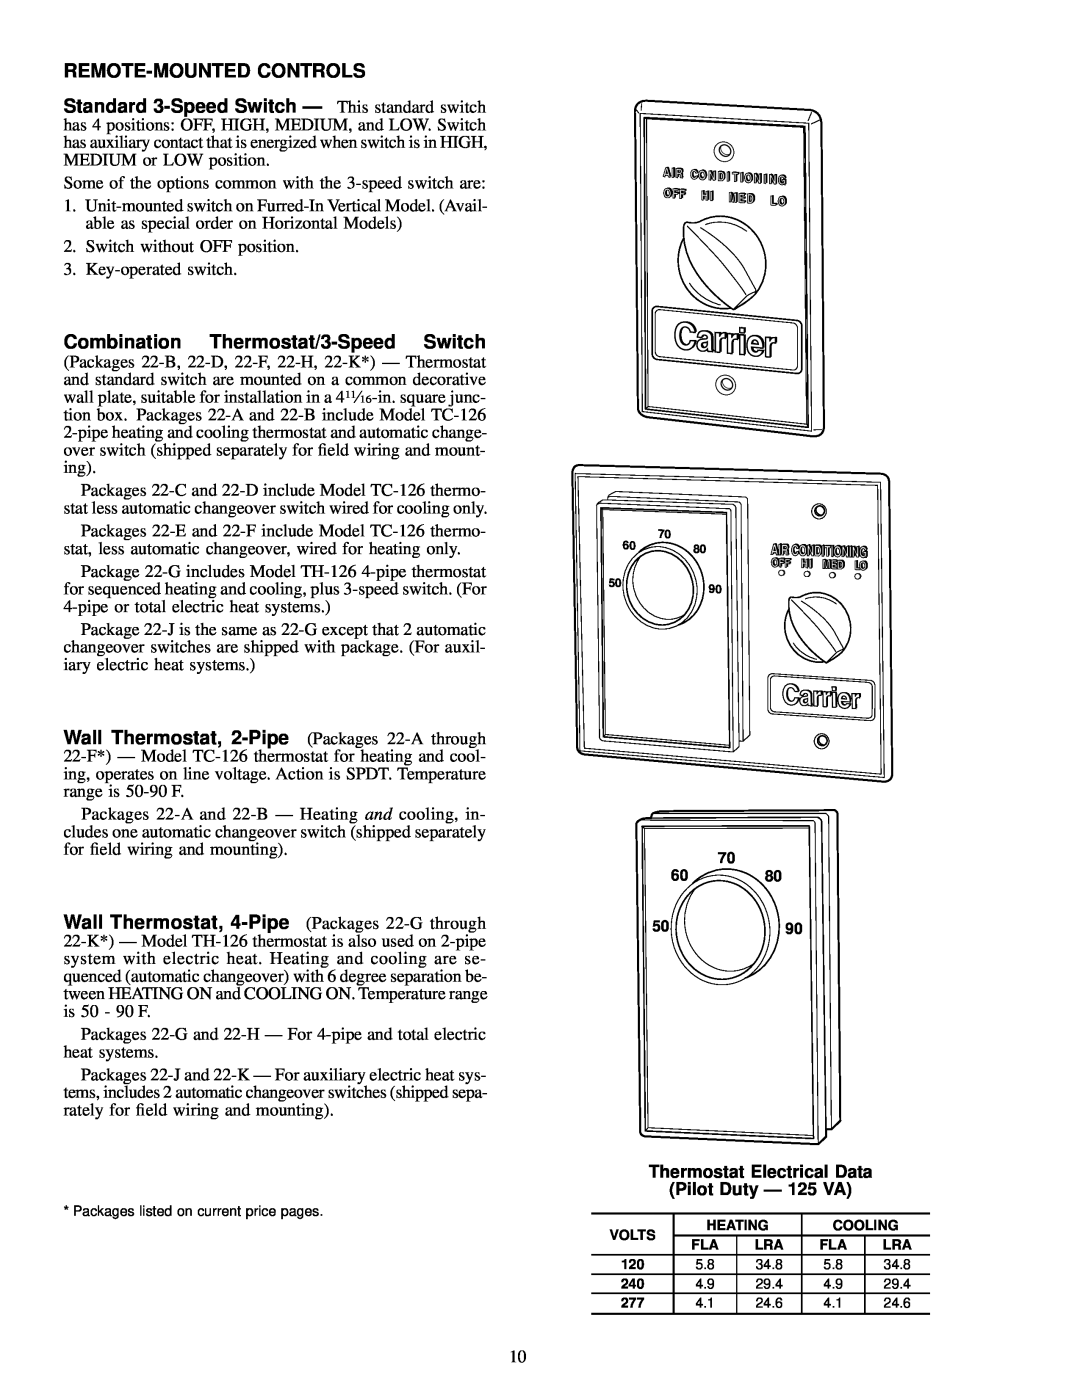 Carrier 42 SERIES specifications Remote-Mountedcontrols, Combination Thermostat/3-SpeedSwitch 